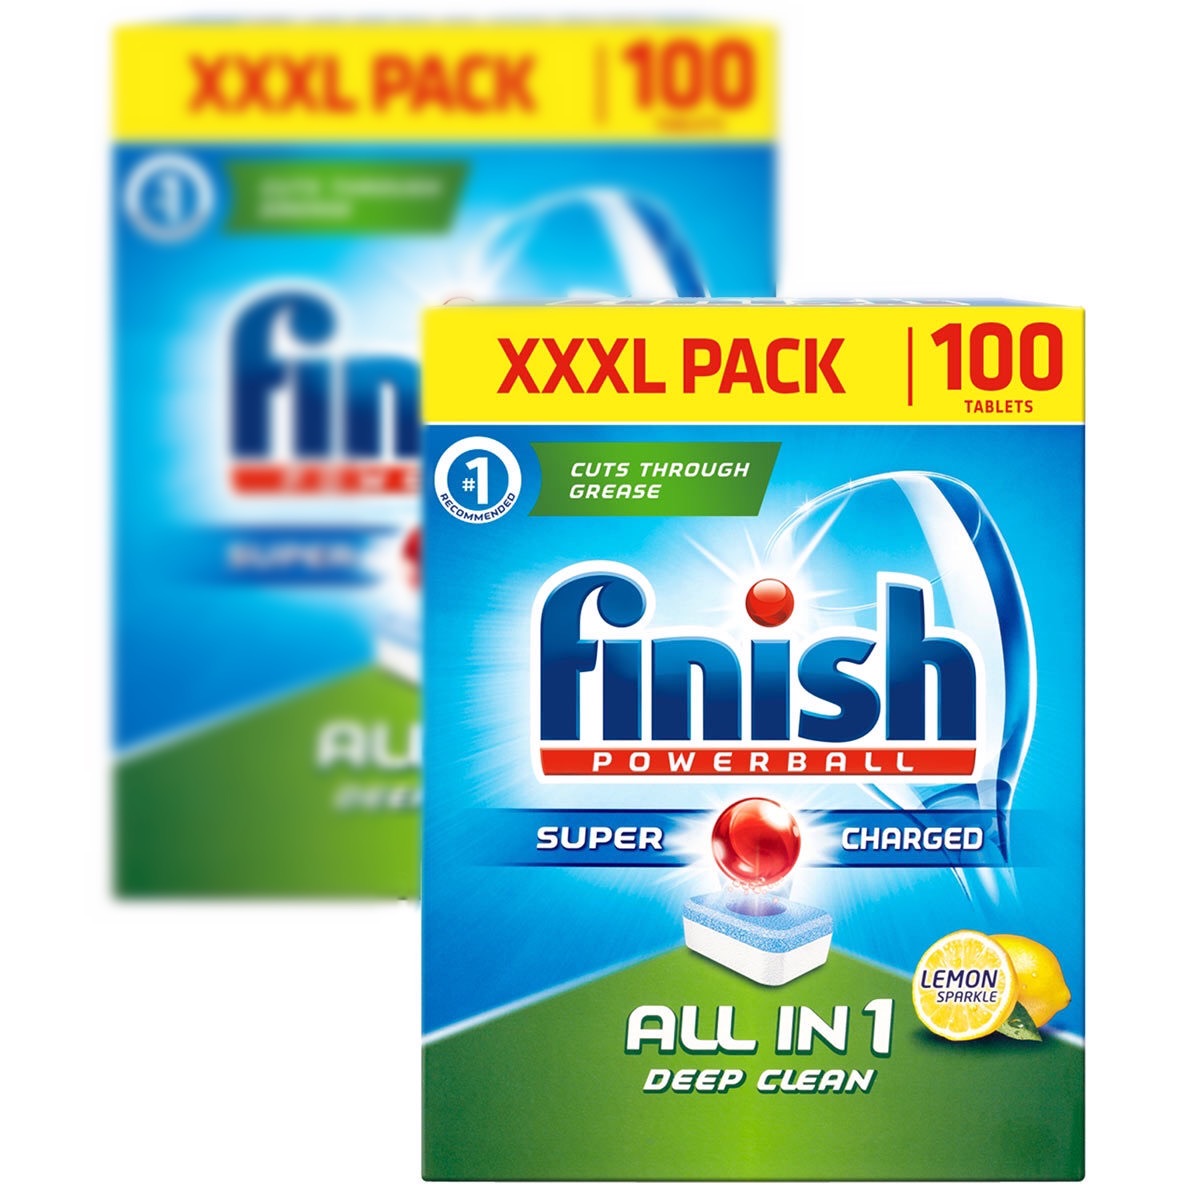 Dishwasher Tablets XXXL, All in One Deep Clean, Finish Powerball (100 tablets)